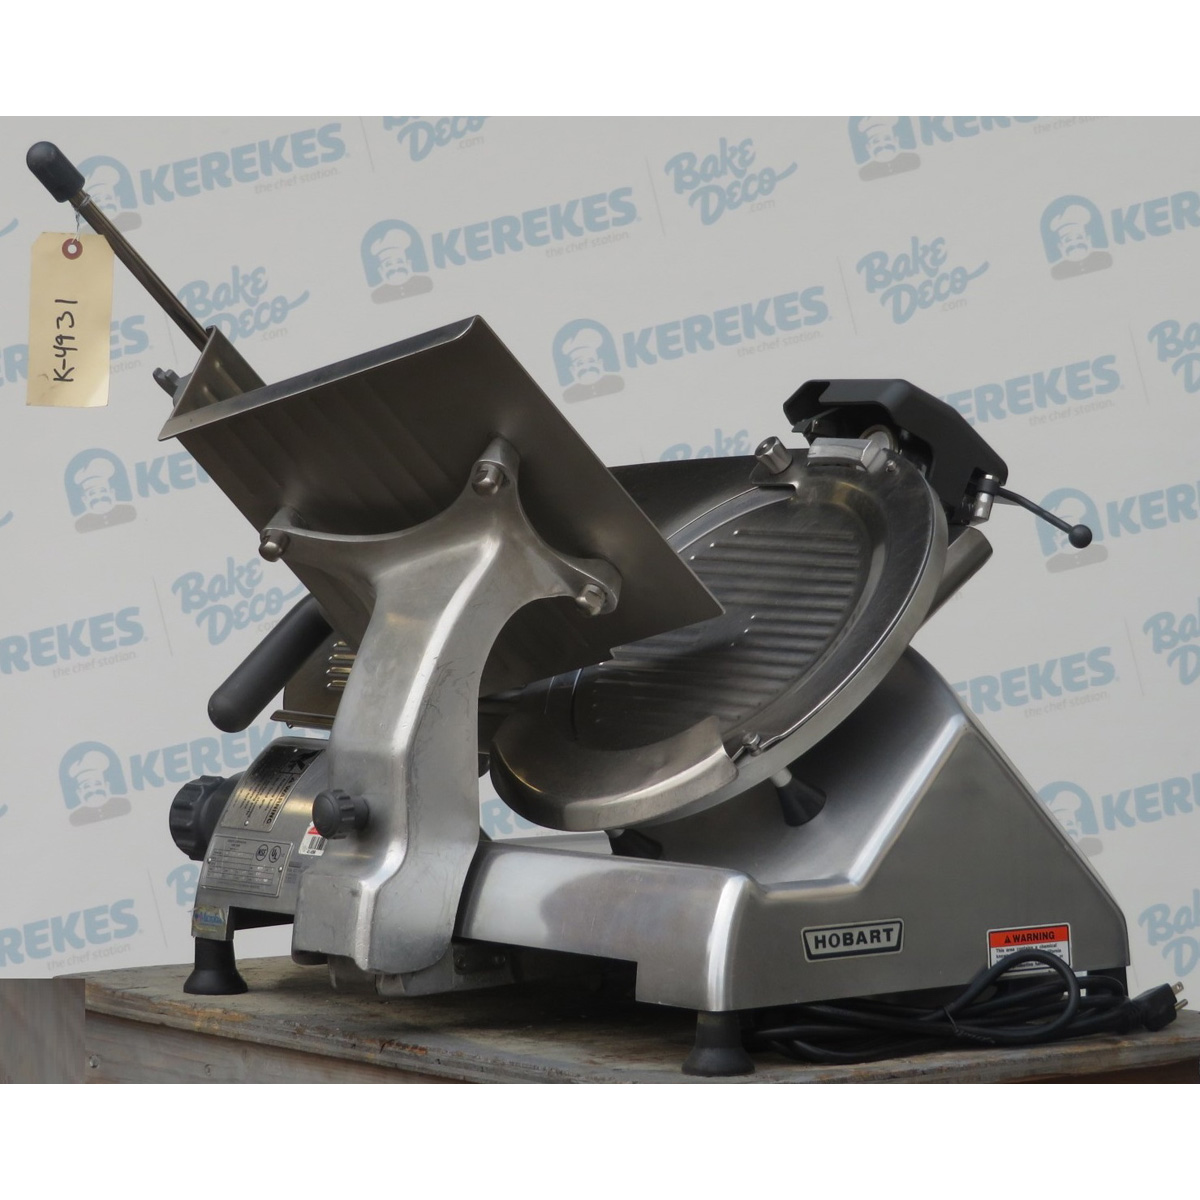 Hobart 2612 Meat Slicer, Used Excellent Condition image 3